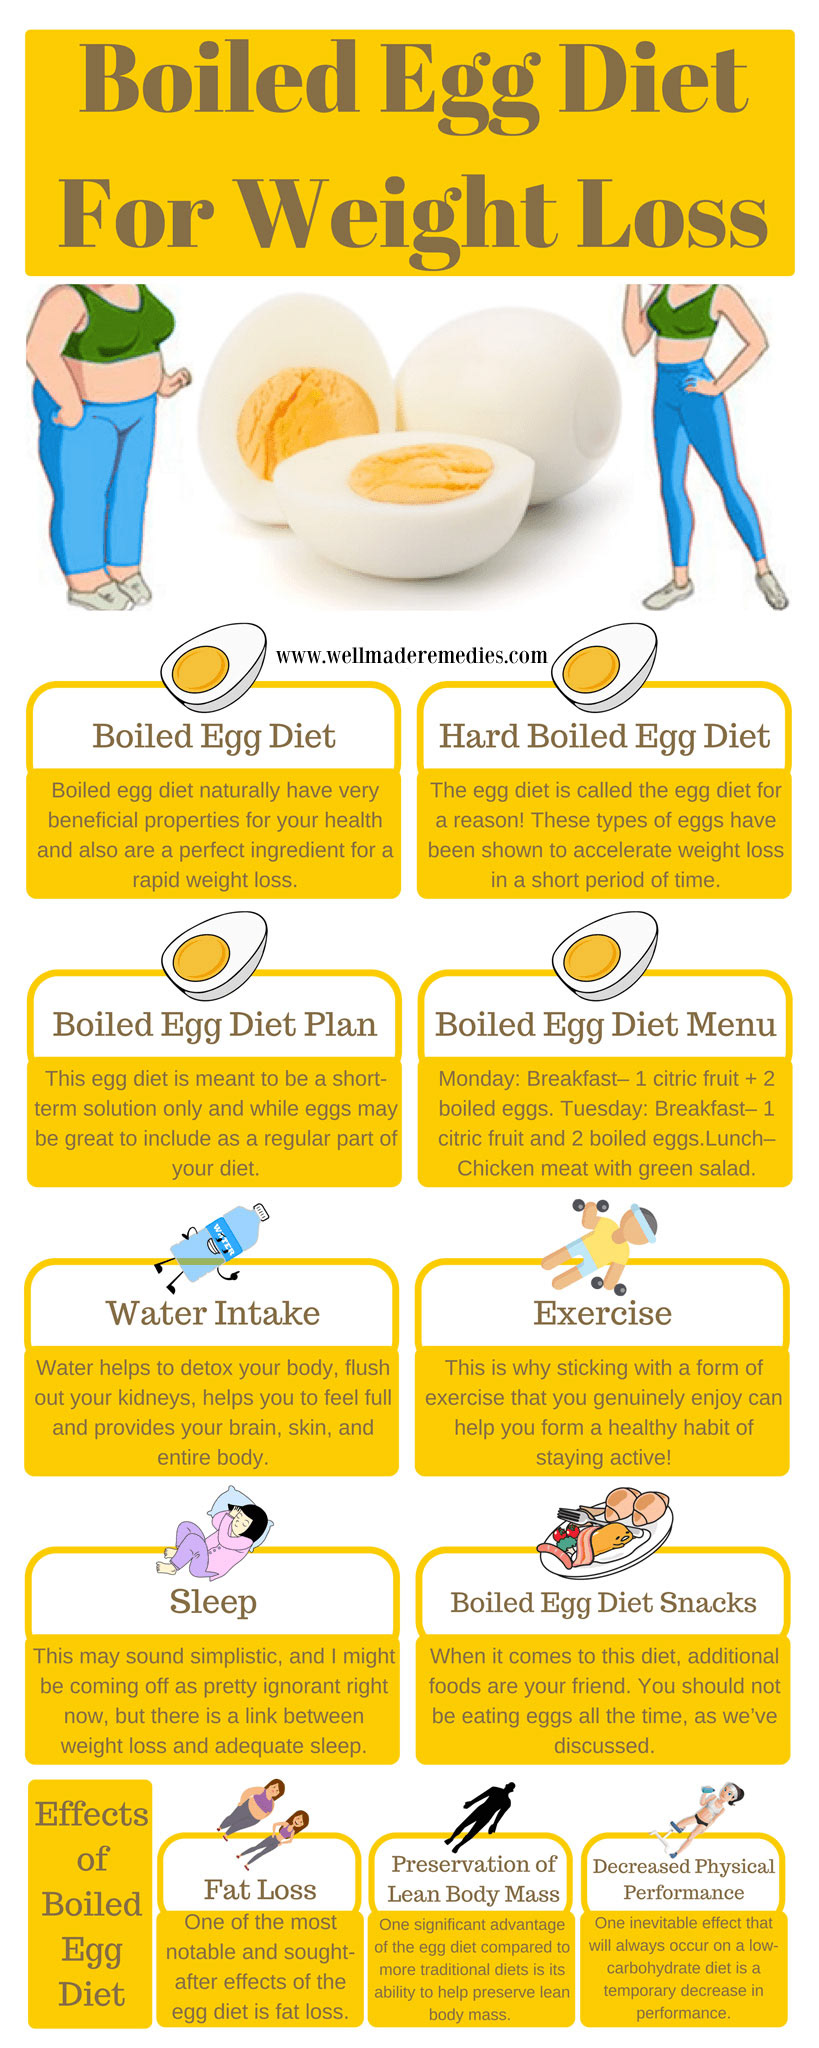 Egg Diet - Pictures